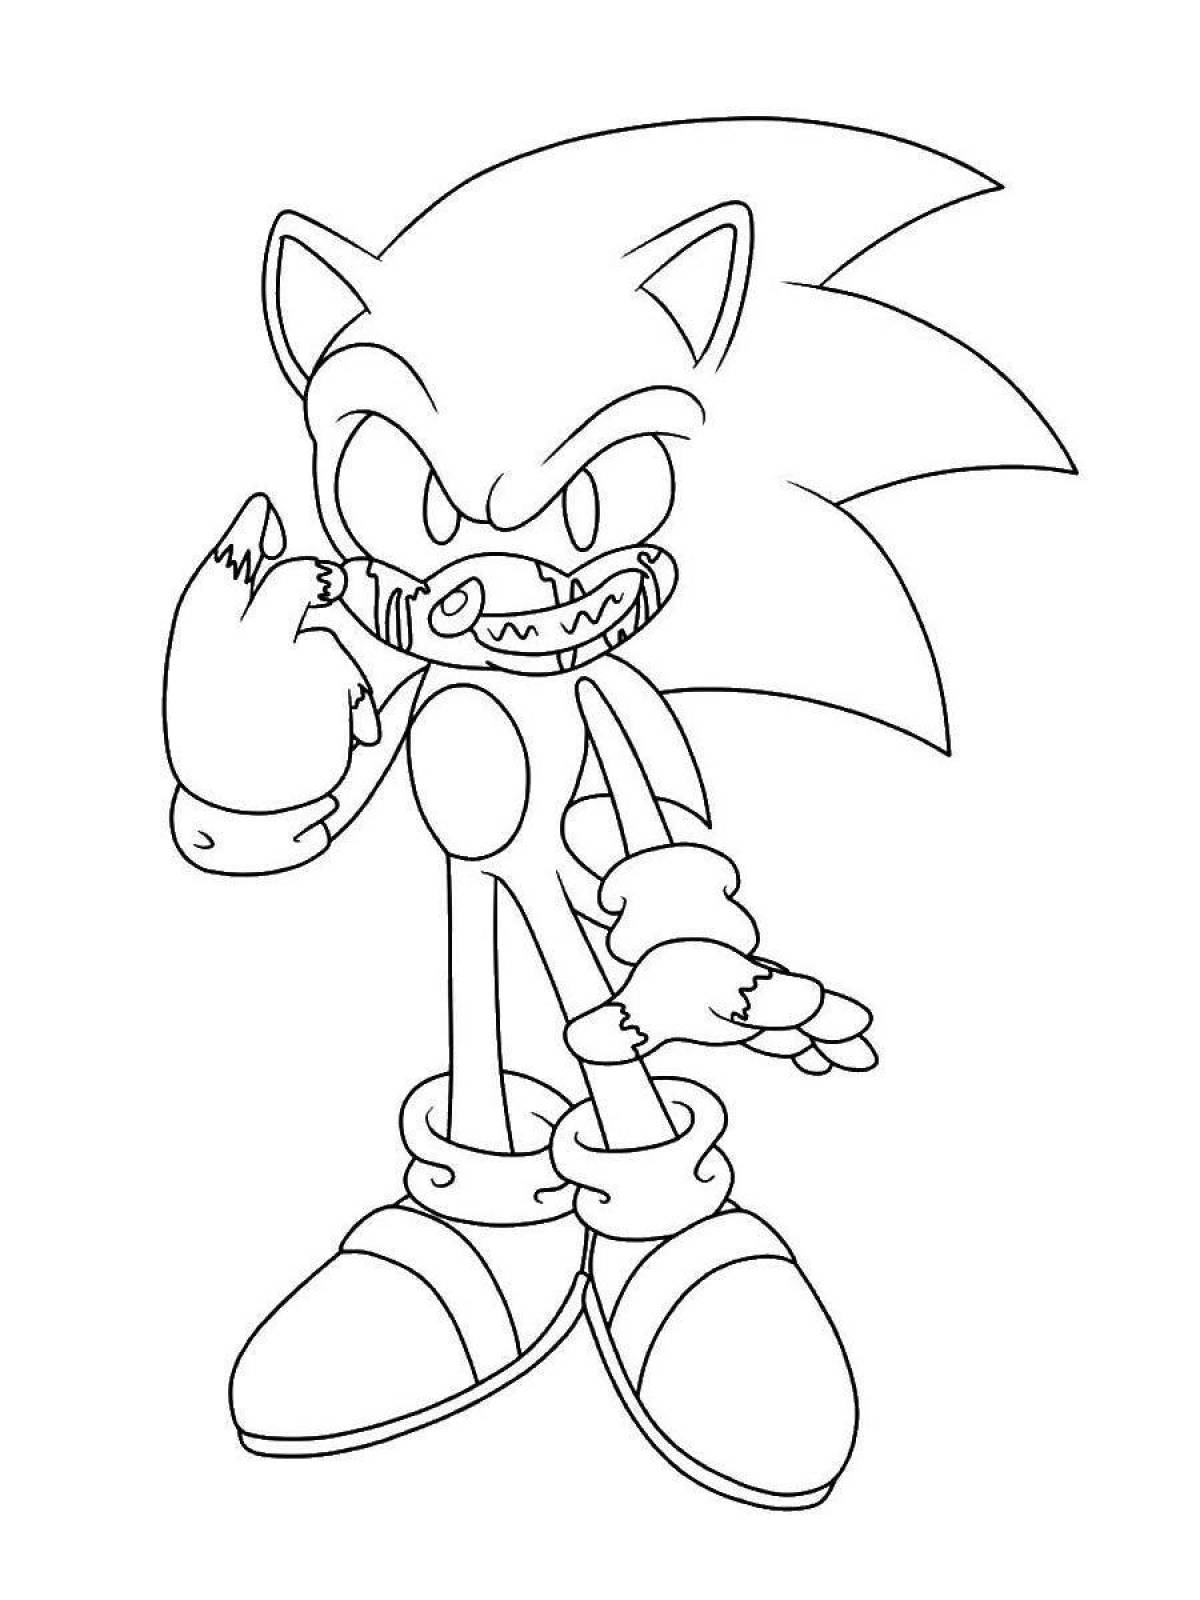 Evil sonic coloring page - lurid